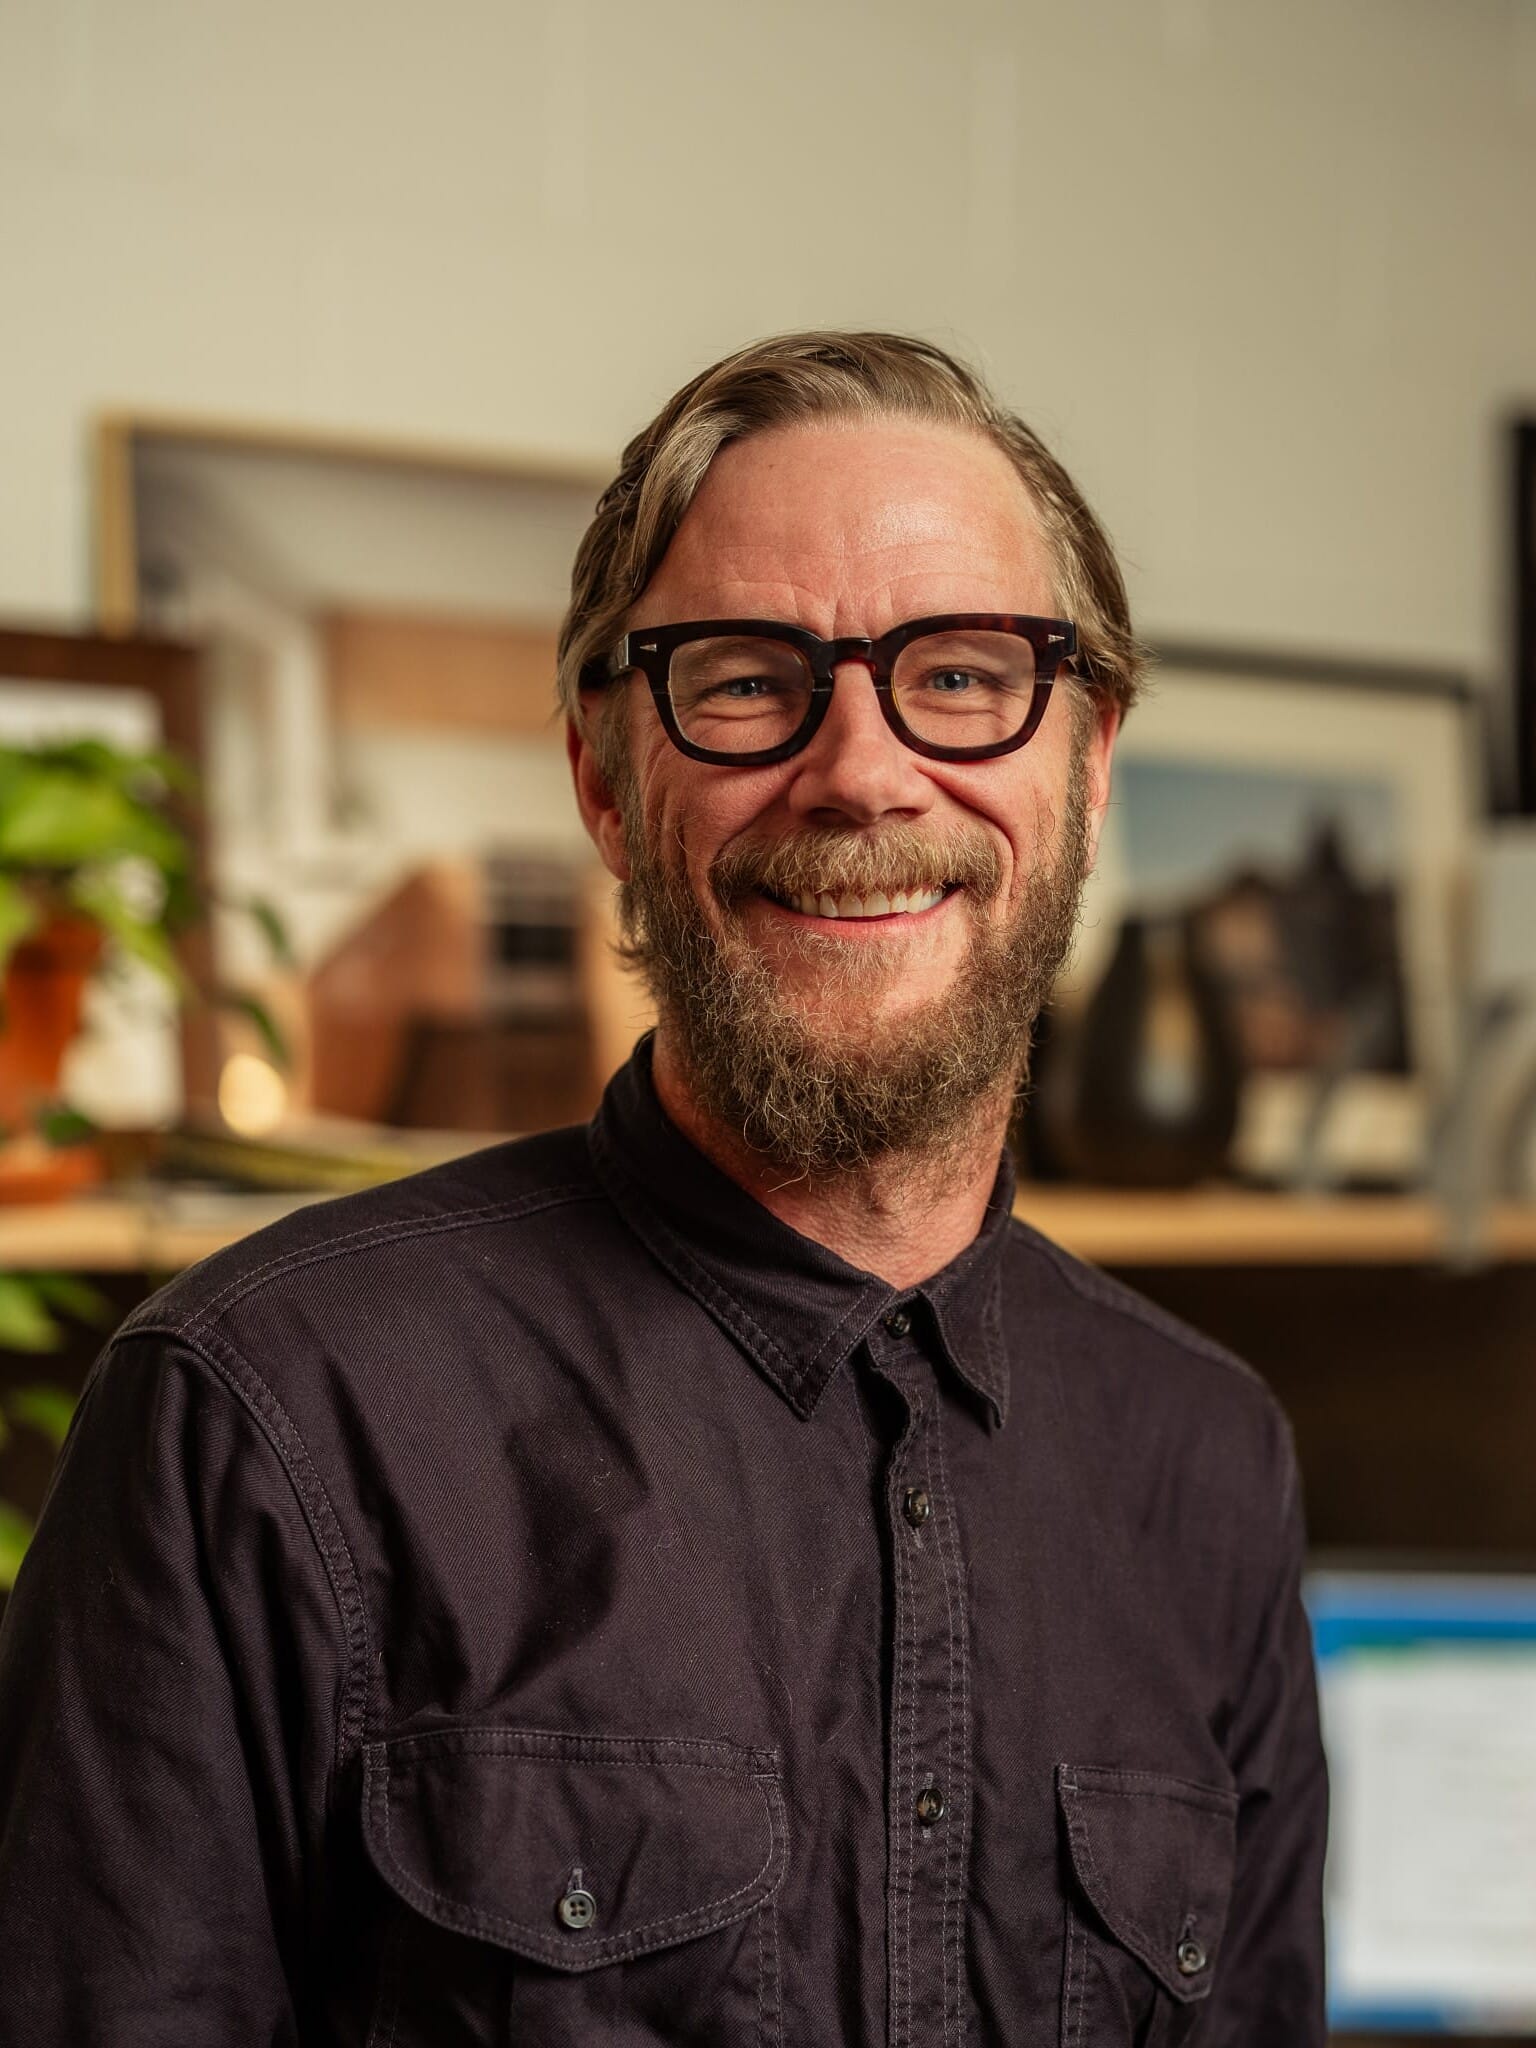 A man with glasses and a beard smiling in front of a desk.